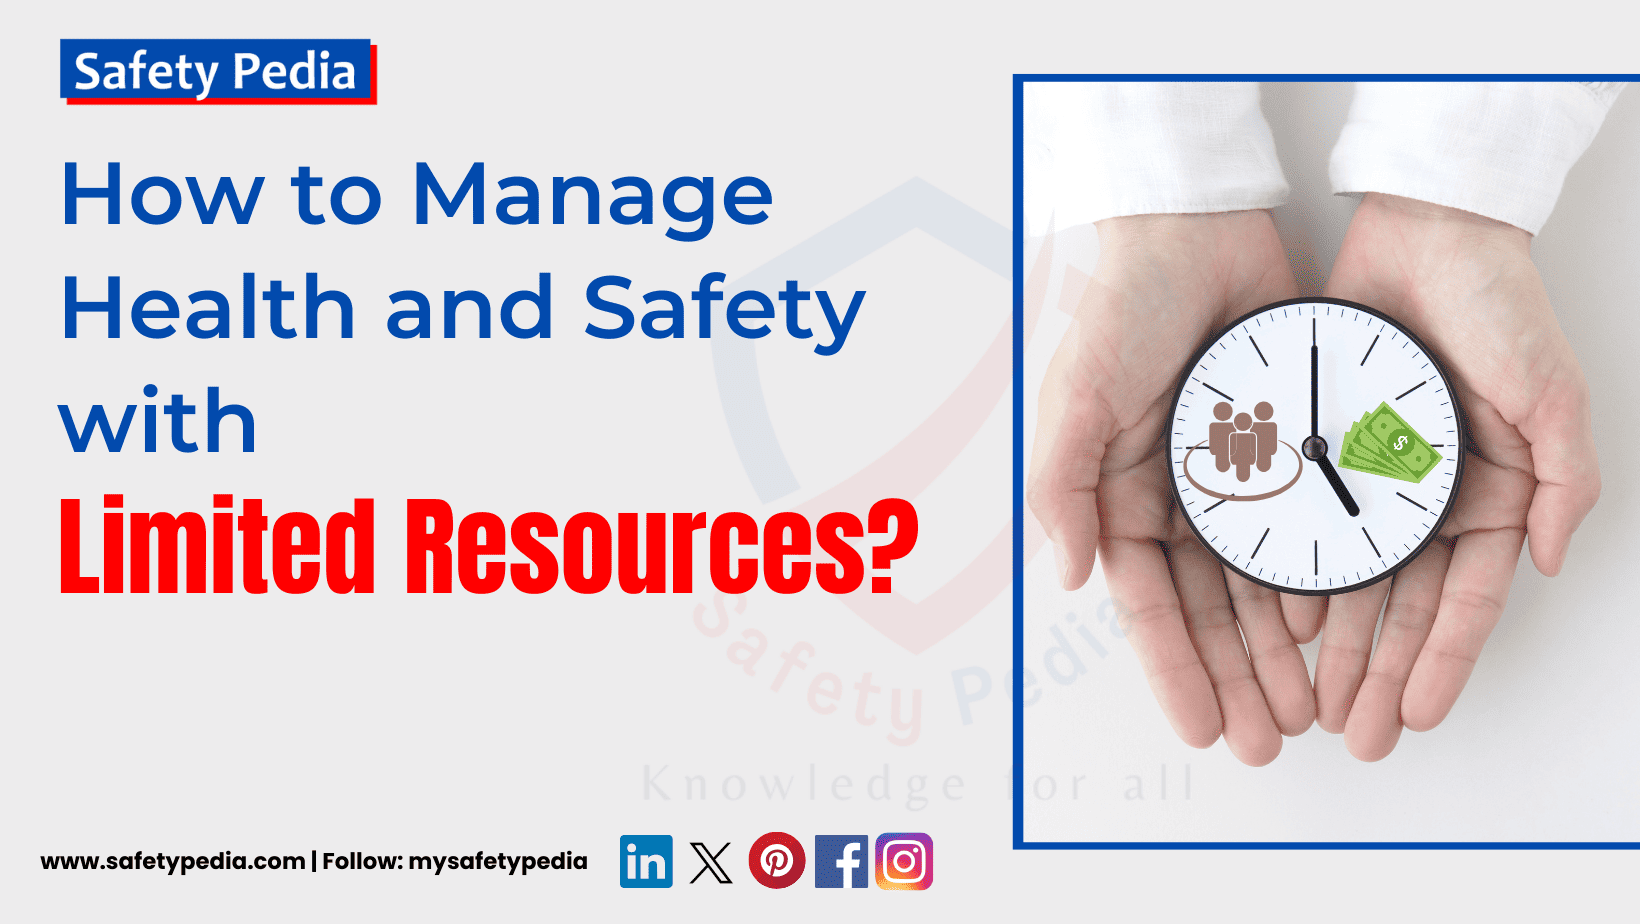 How to Manage Health and Safety with Limited Resources.